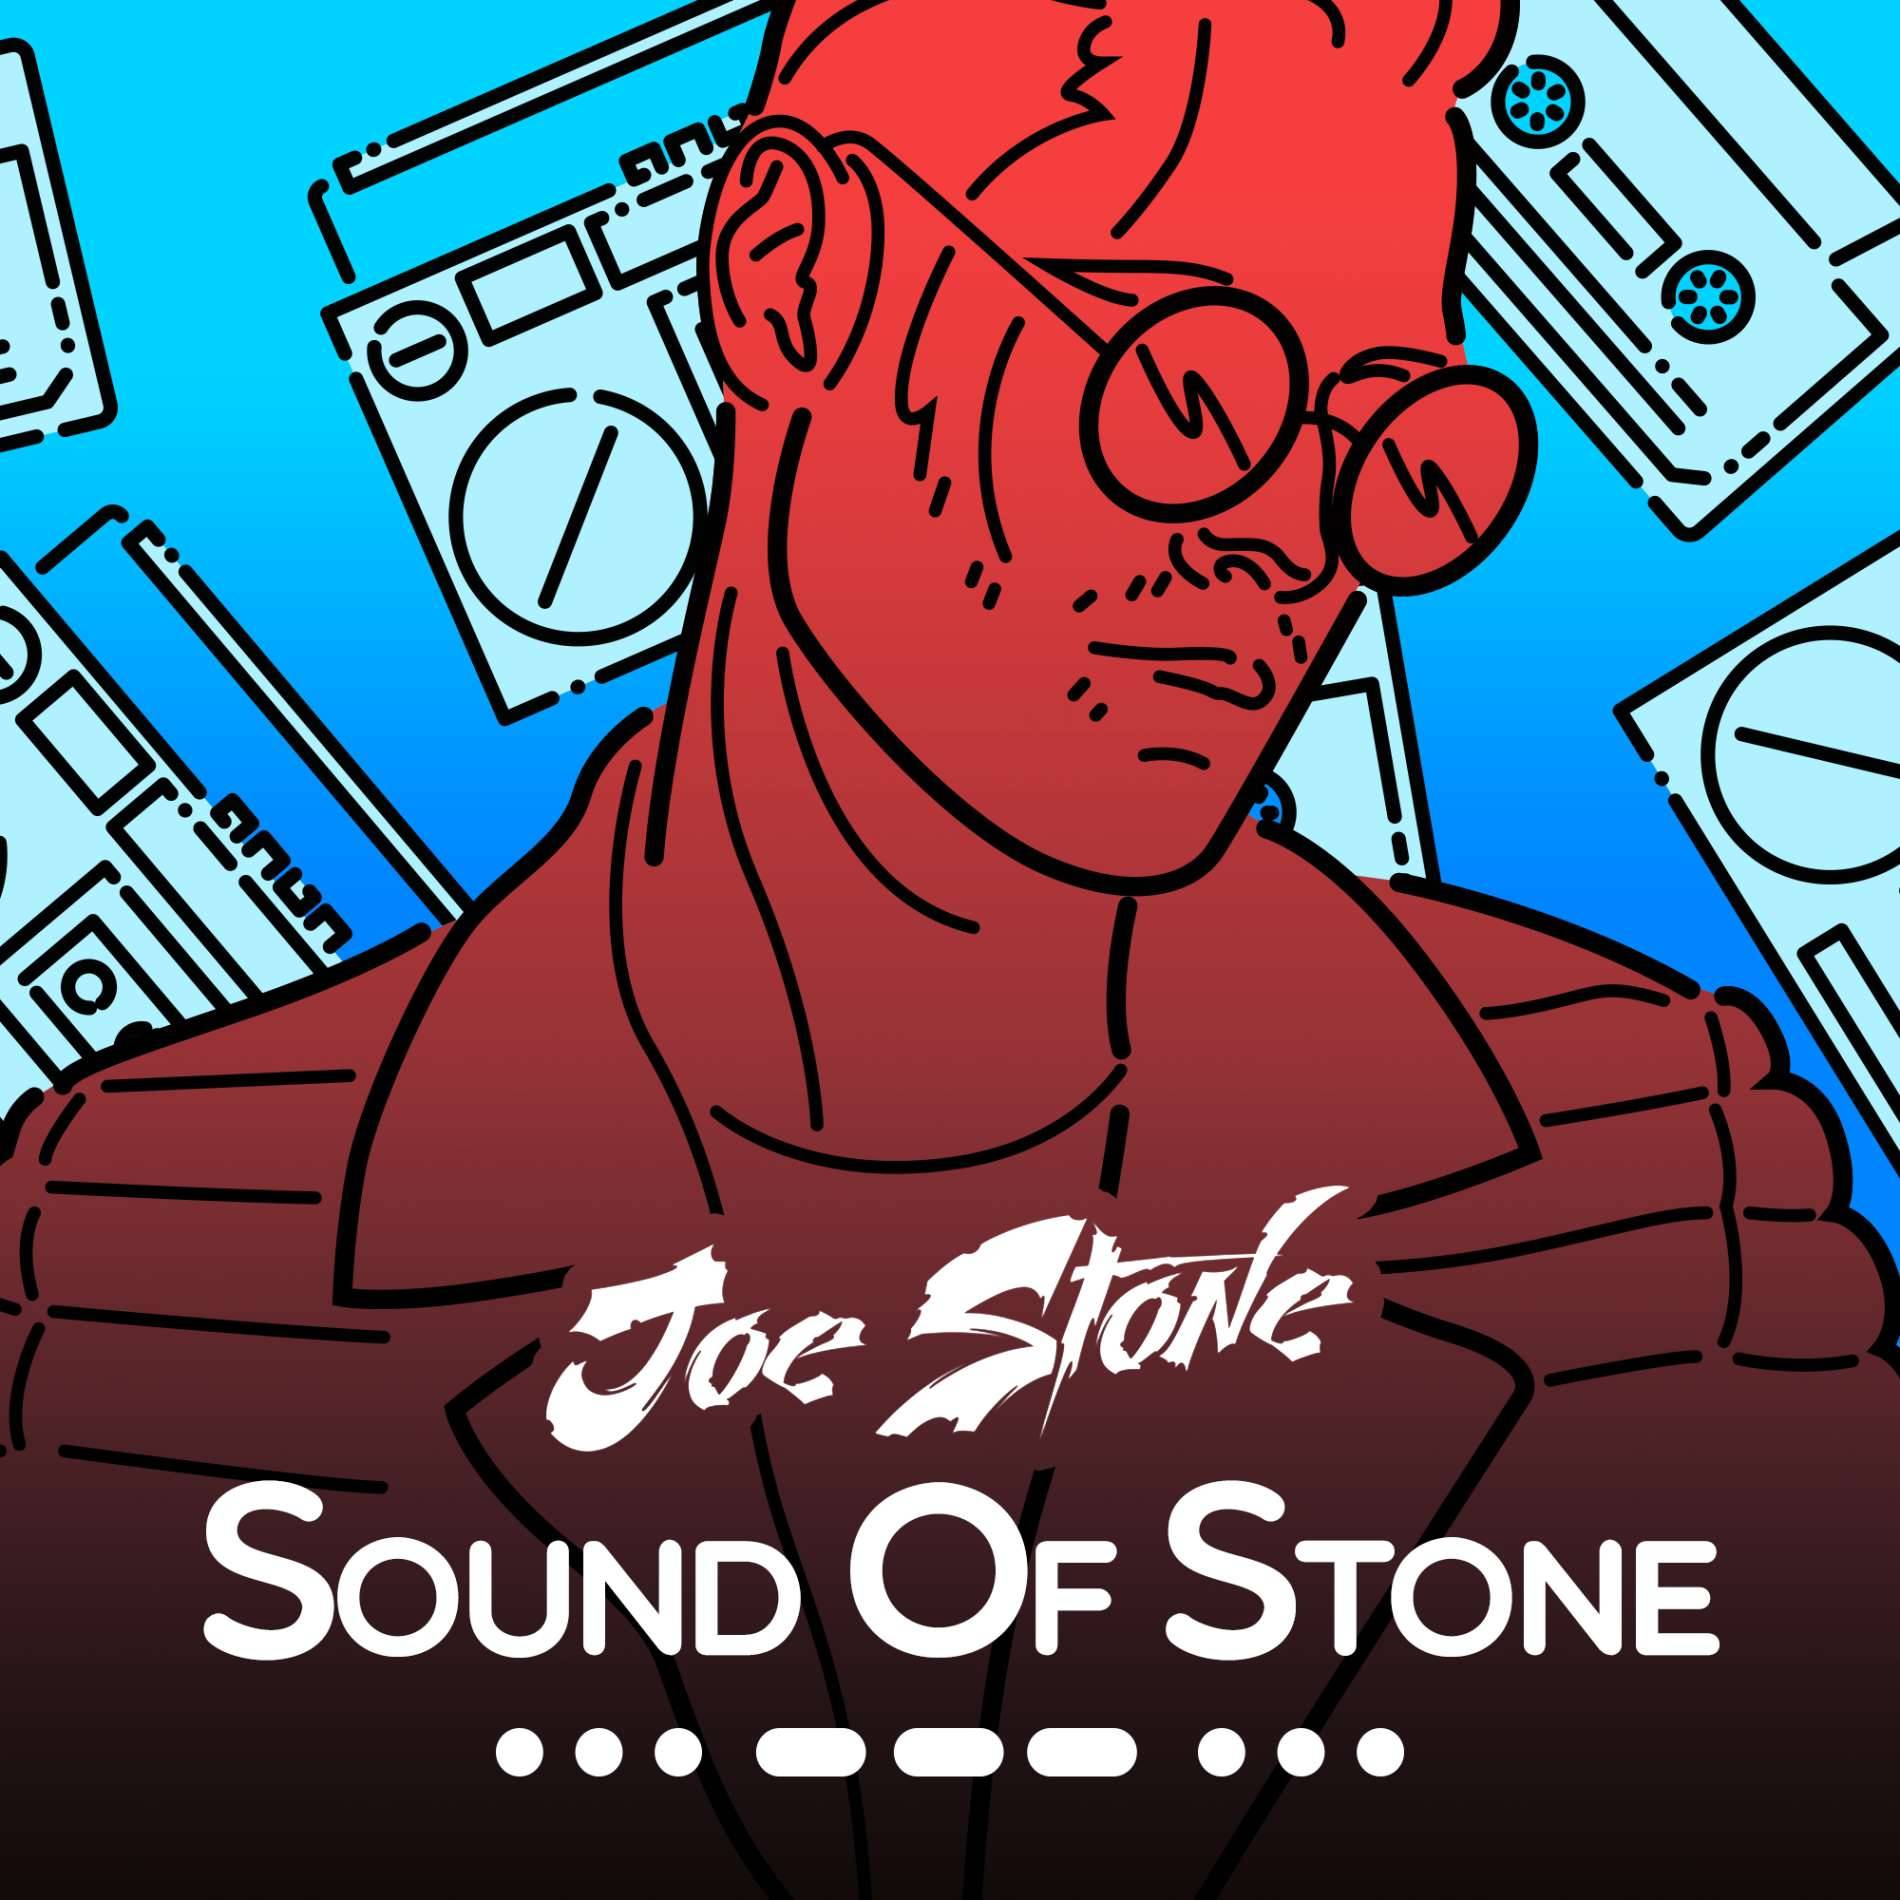 Check out the Sound Of Stone